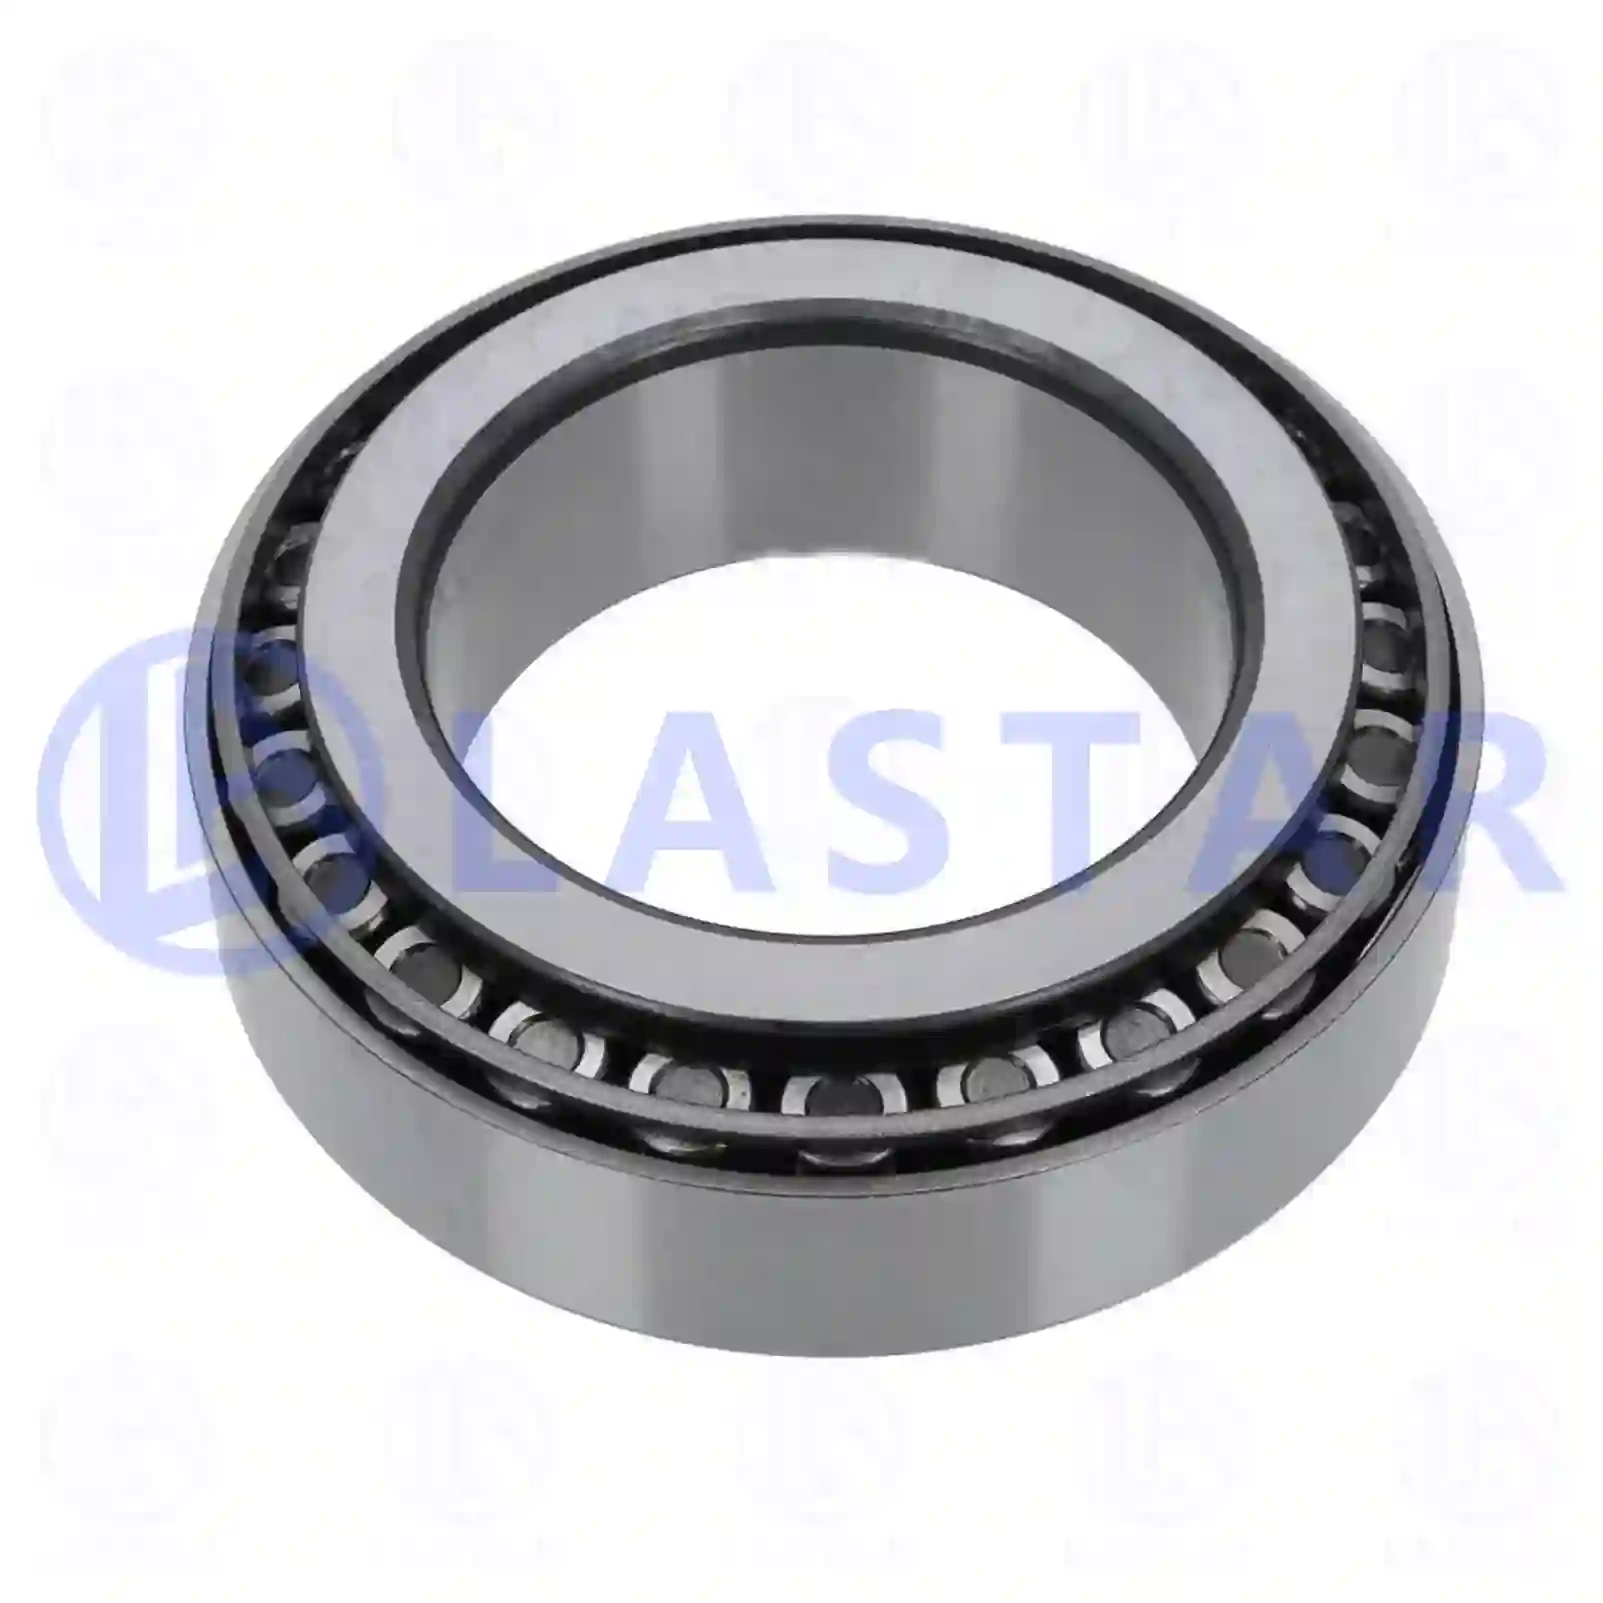 Tapered roller bearing, 77726327, 0264088000, 0264102400, 0902640880, 1489089, 836586, 99041067, 10500572, 710500572, 09985454, 99041067, 06324906400, 0129814005, 0129814050, 0129814105, 0179814905, 99041067B, 1301694, 012547, 017062, 6691393000, ZG03007-0008 ||  77726327 Lastar Spare Part | Truck Spare Parts, Auotomotive Spare Parts Tapered roller bearing, 77726327, 0264088000, 0264102400, 0902640880, 1489089, 836586, 99041067, 10500572, 710500572, 09985454, 99041067, 06324906400, 0129814005, 0129814050, 0129814105, 0179814905, 99041067B, 1301694, 012547, 017062, 6691393000, ZG03007-0008 ||  77726327 Lastar Spare Part | Truck Spare Parts, Auotomotive Spare Parts